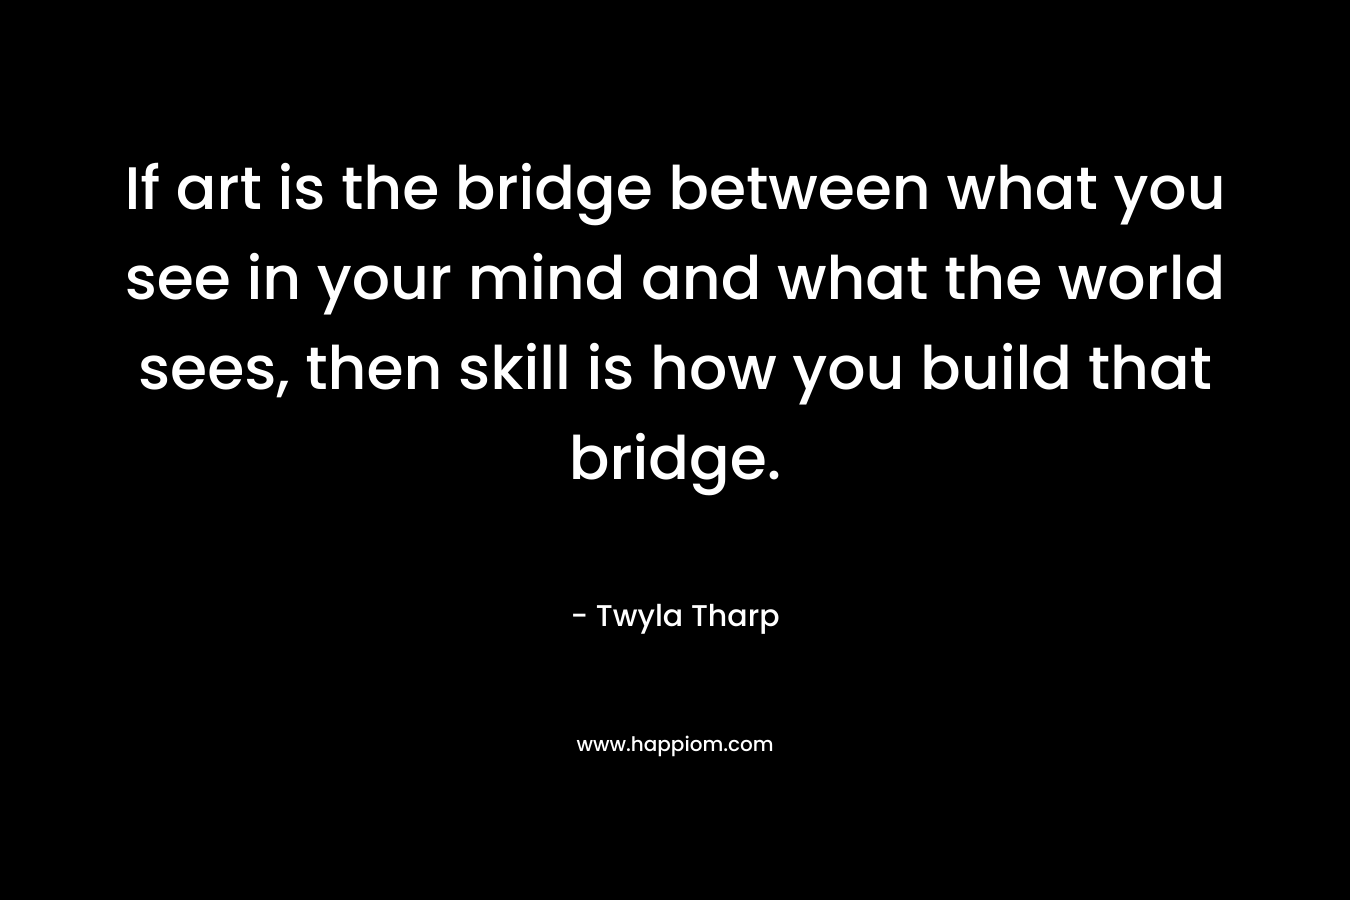 If art is the bridge between what you see in your mind and what the world sees, then skill is how you build that bridge. – Twyla Tharp